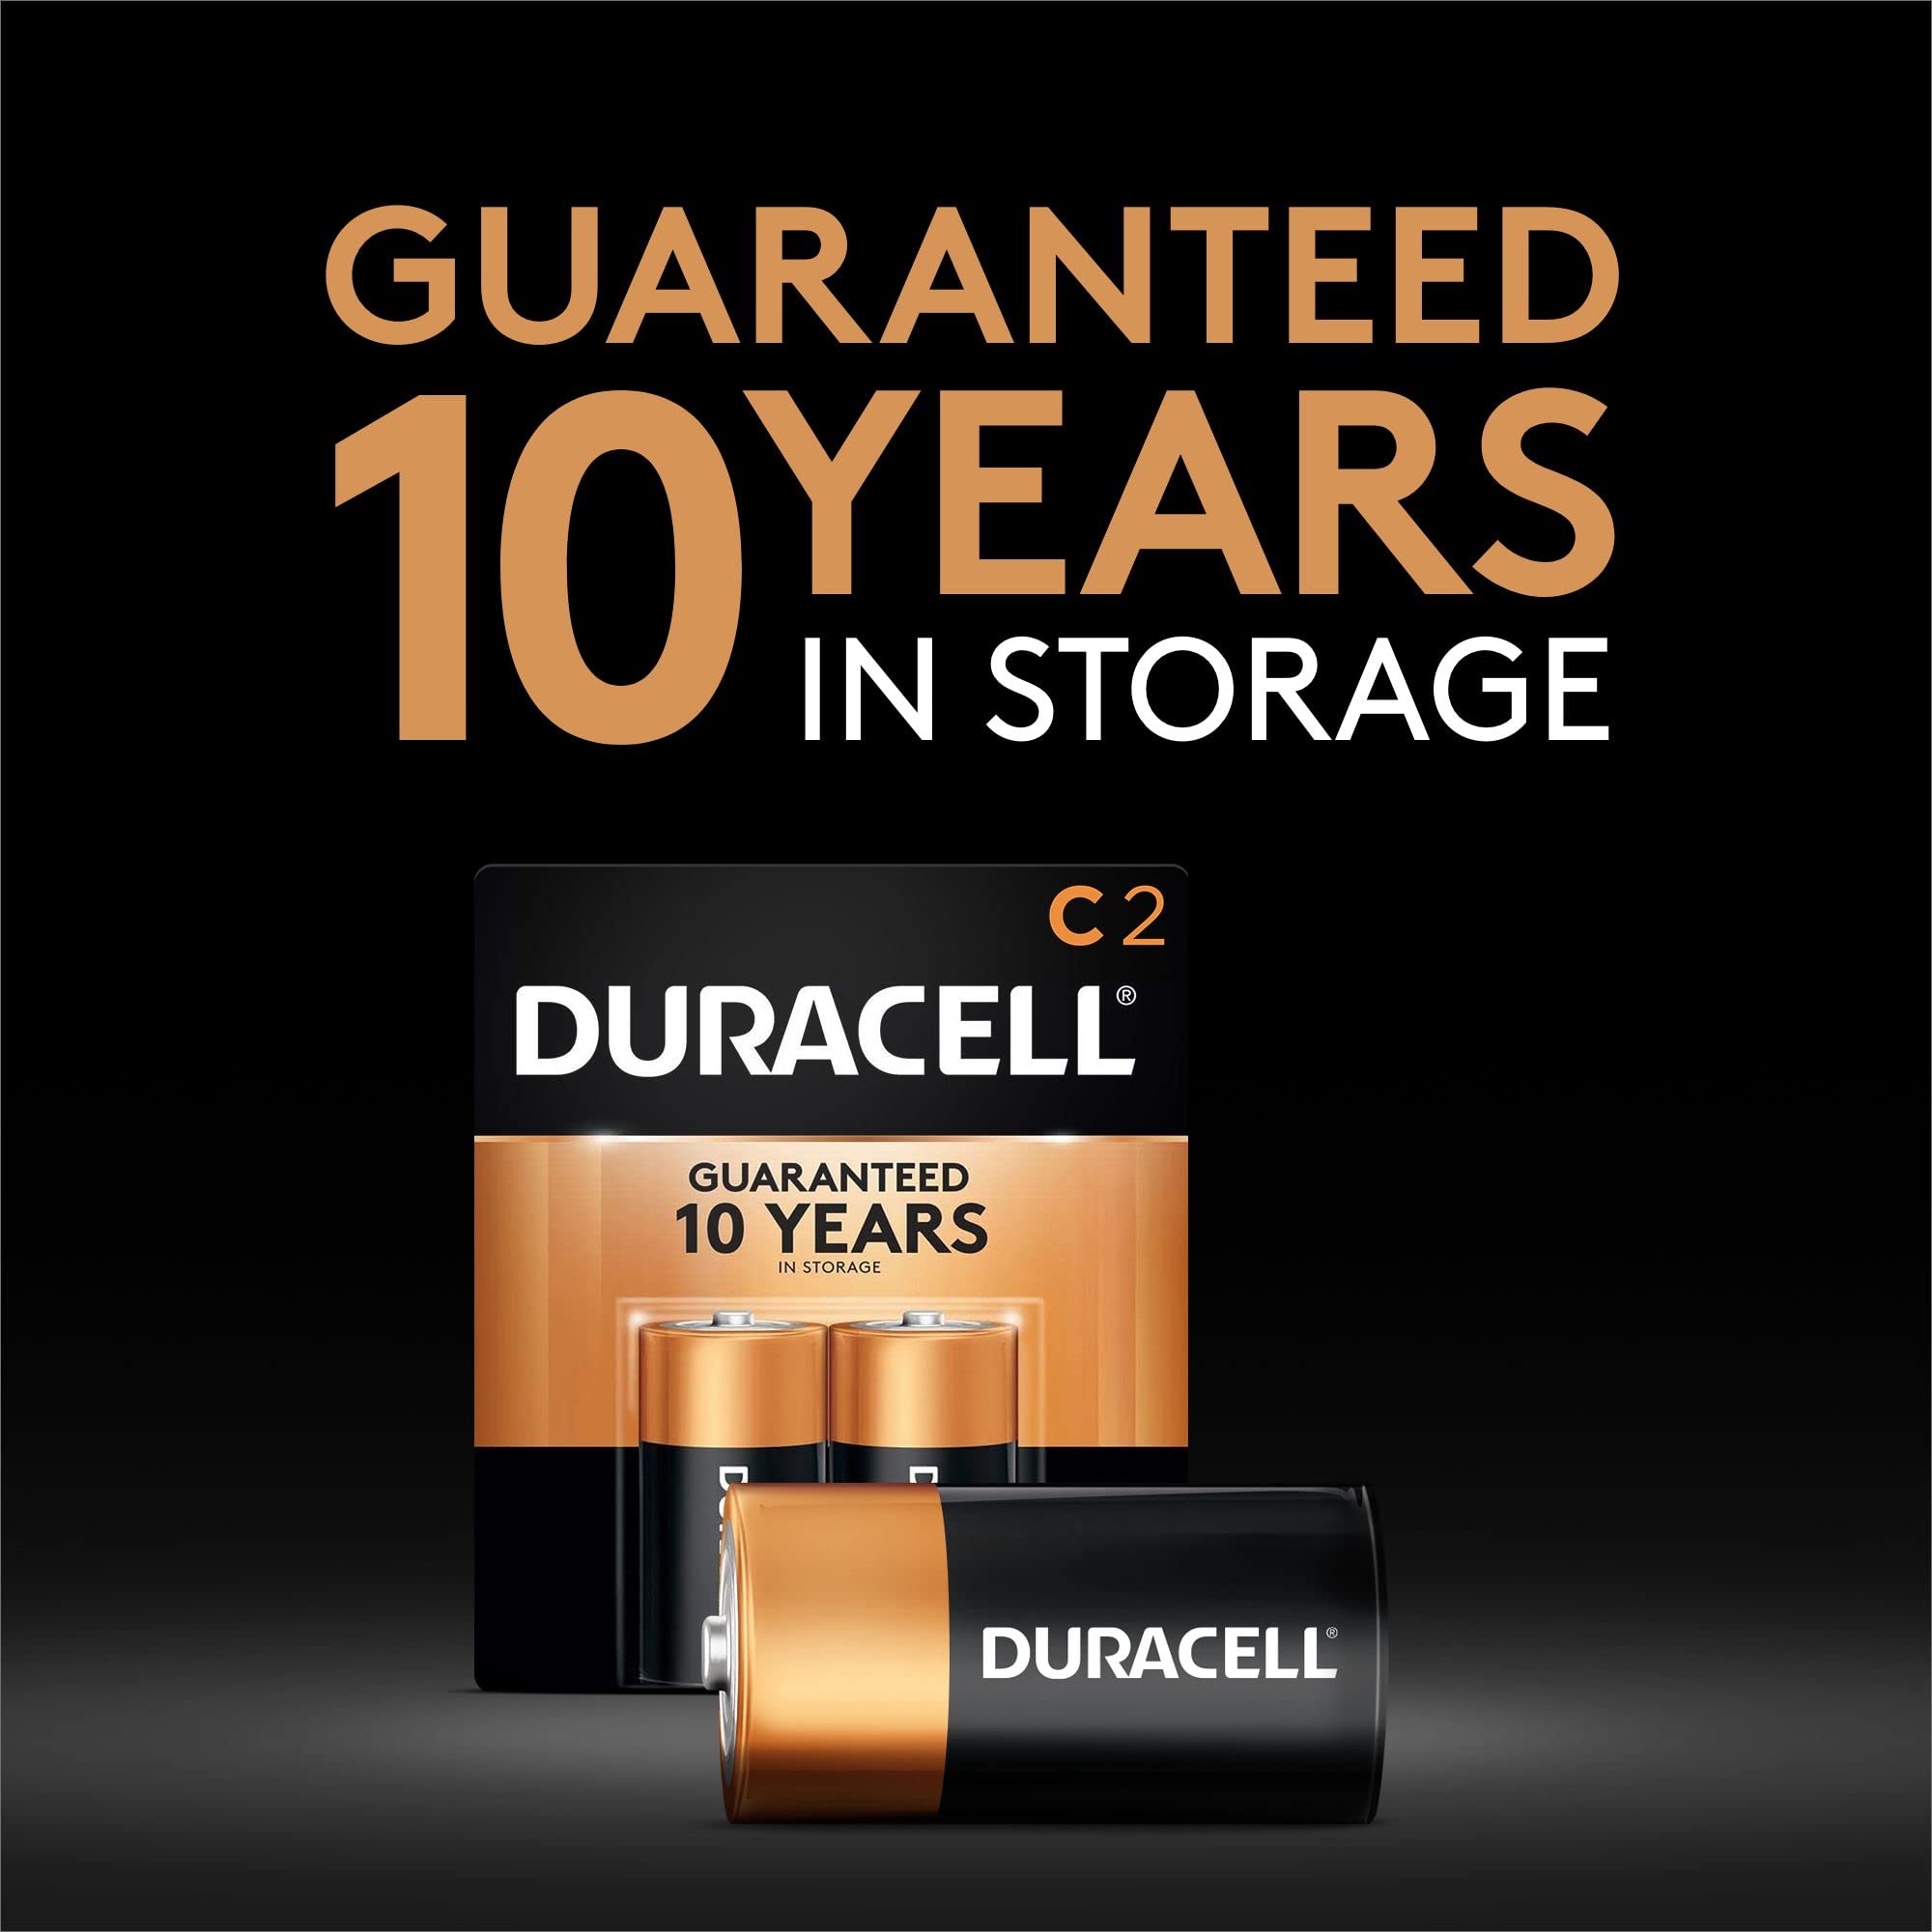 DURACELL Coppertop 1.5V Size C Alkaline Battery, (Pack of 20) - image 3 of 5